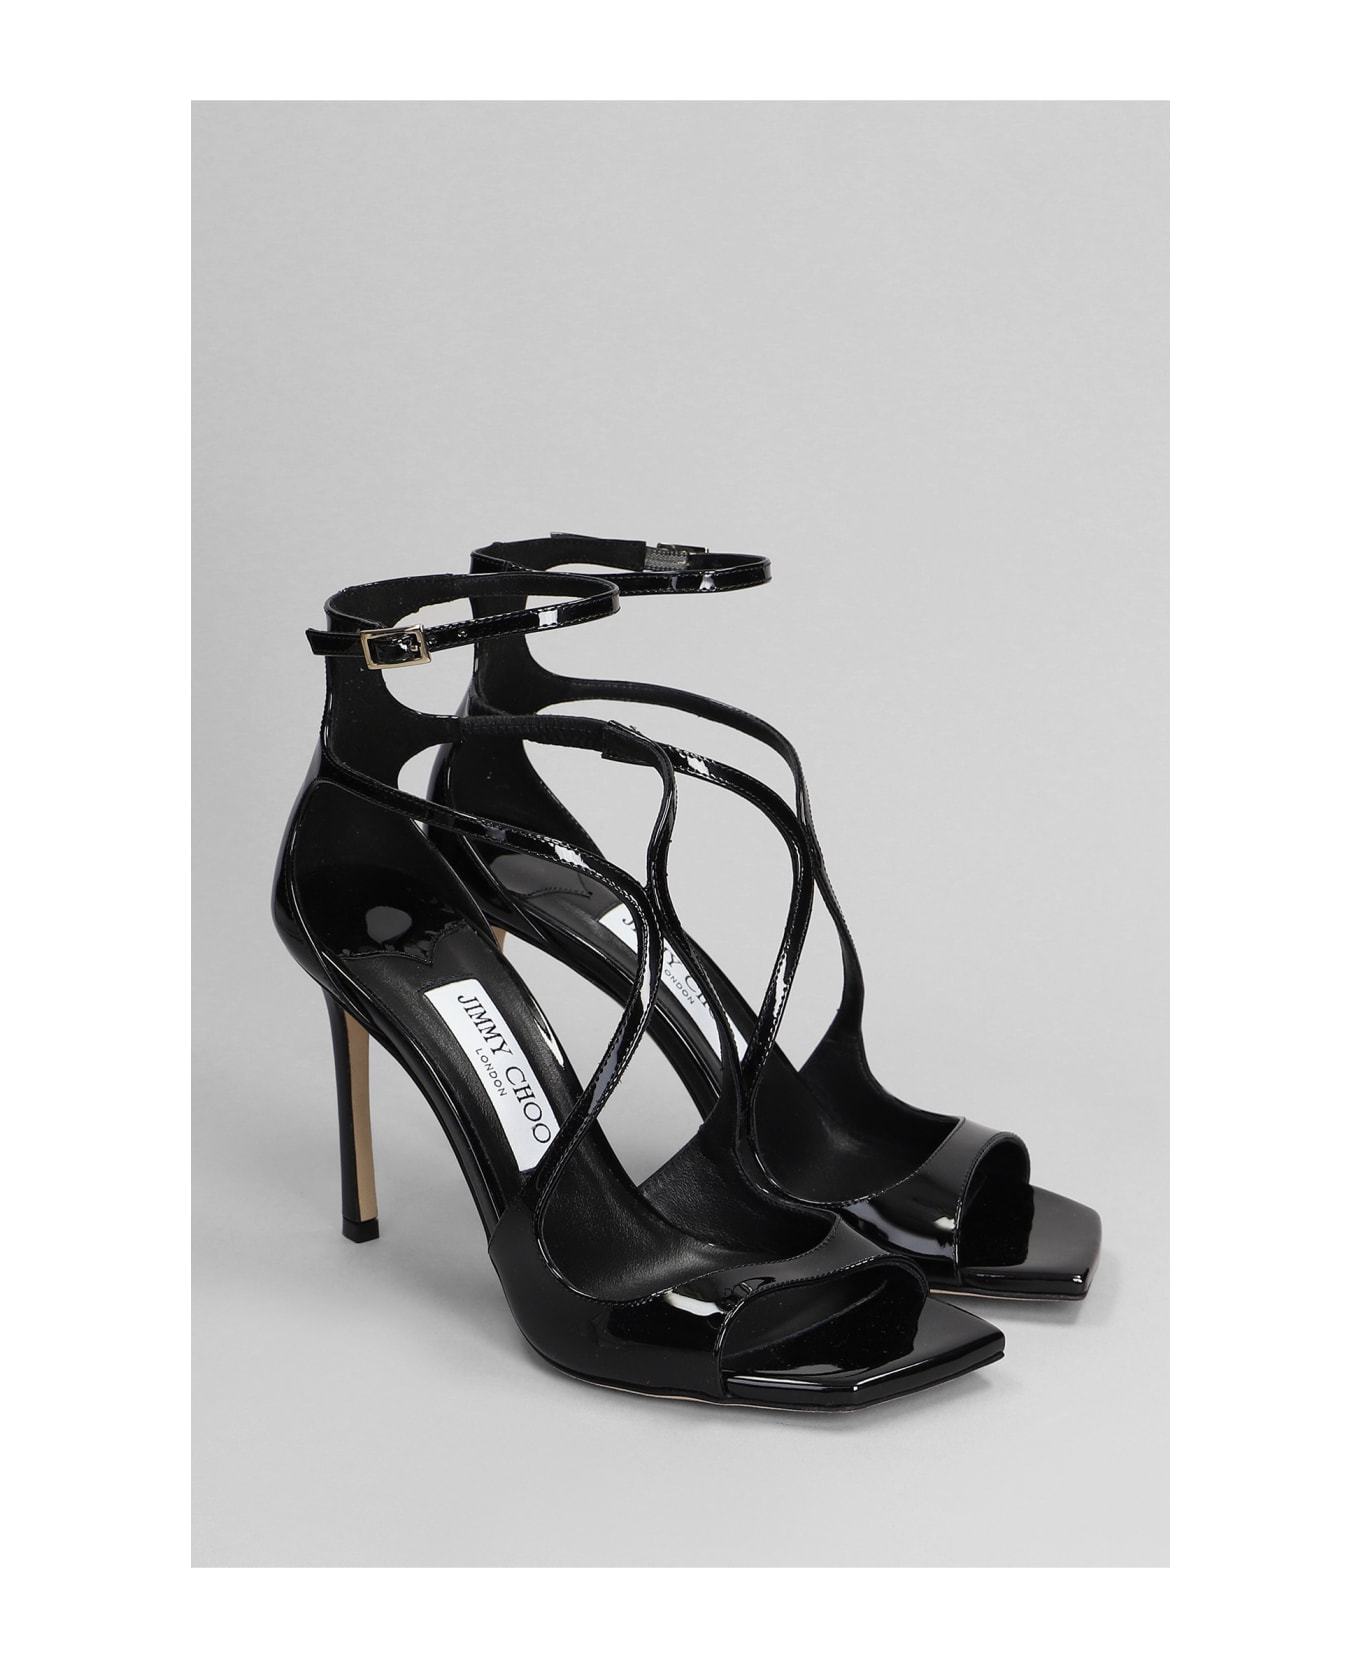 Jimmy Choo Azia 95 Sandals In Black Patent Leather - black